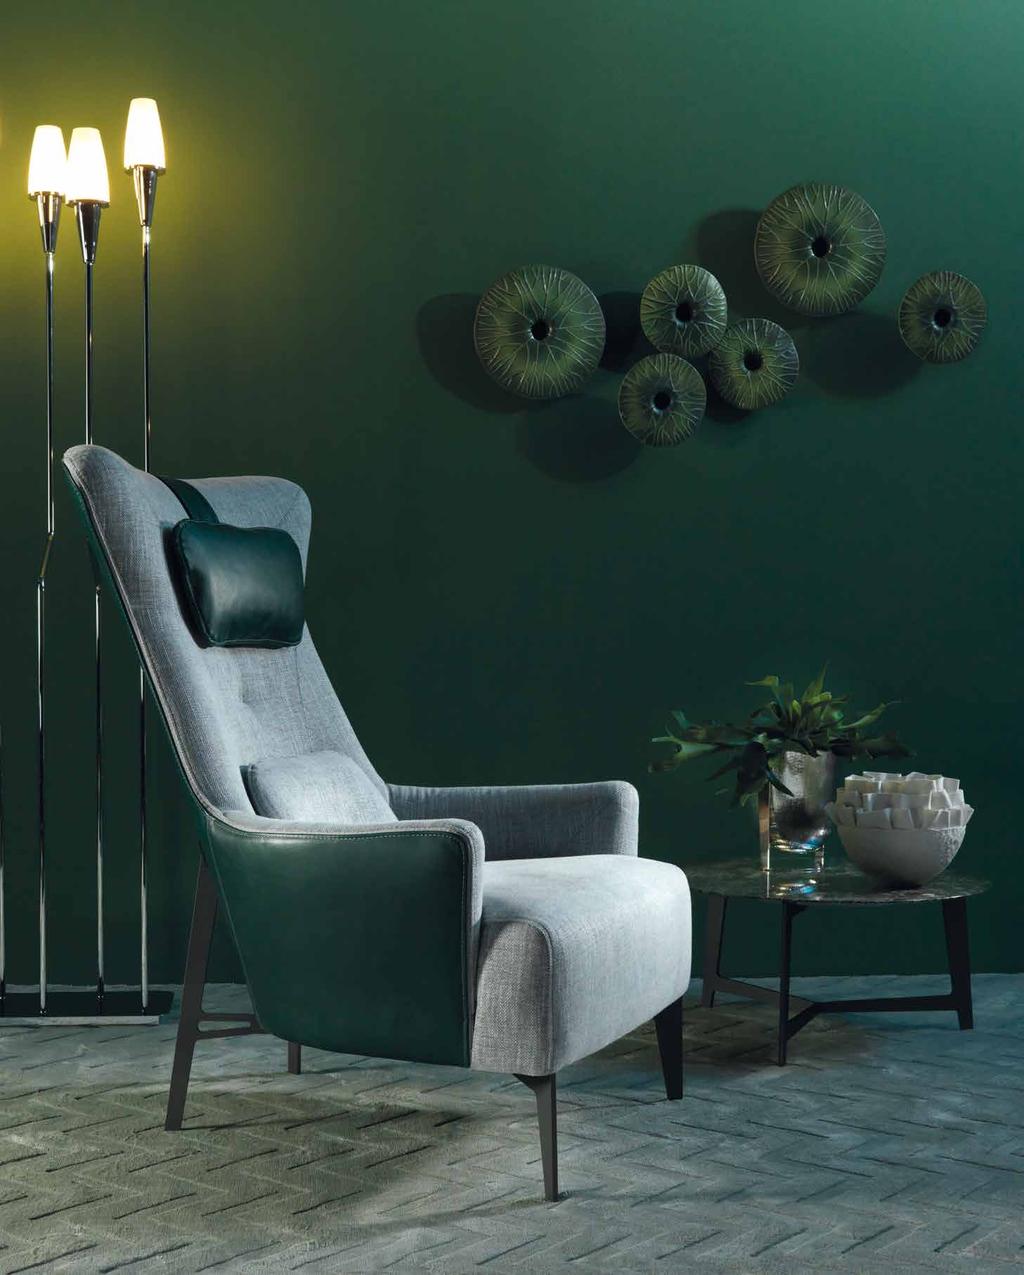 KRIS MIA The Mia armchair provides all the comfort and style of tradition reinterpreted